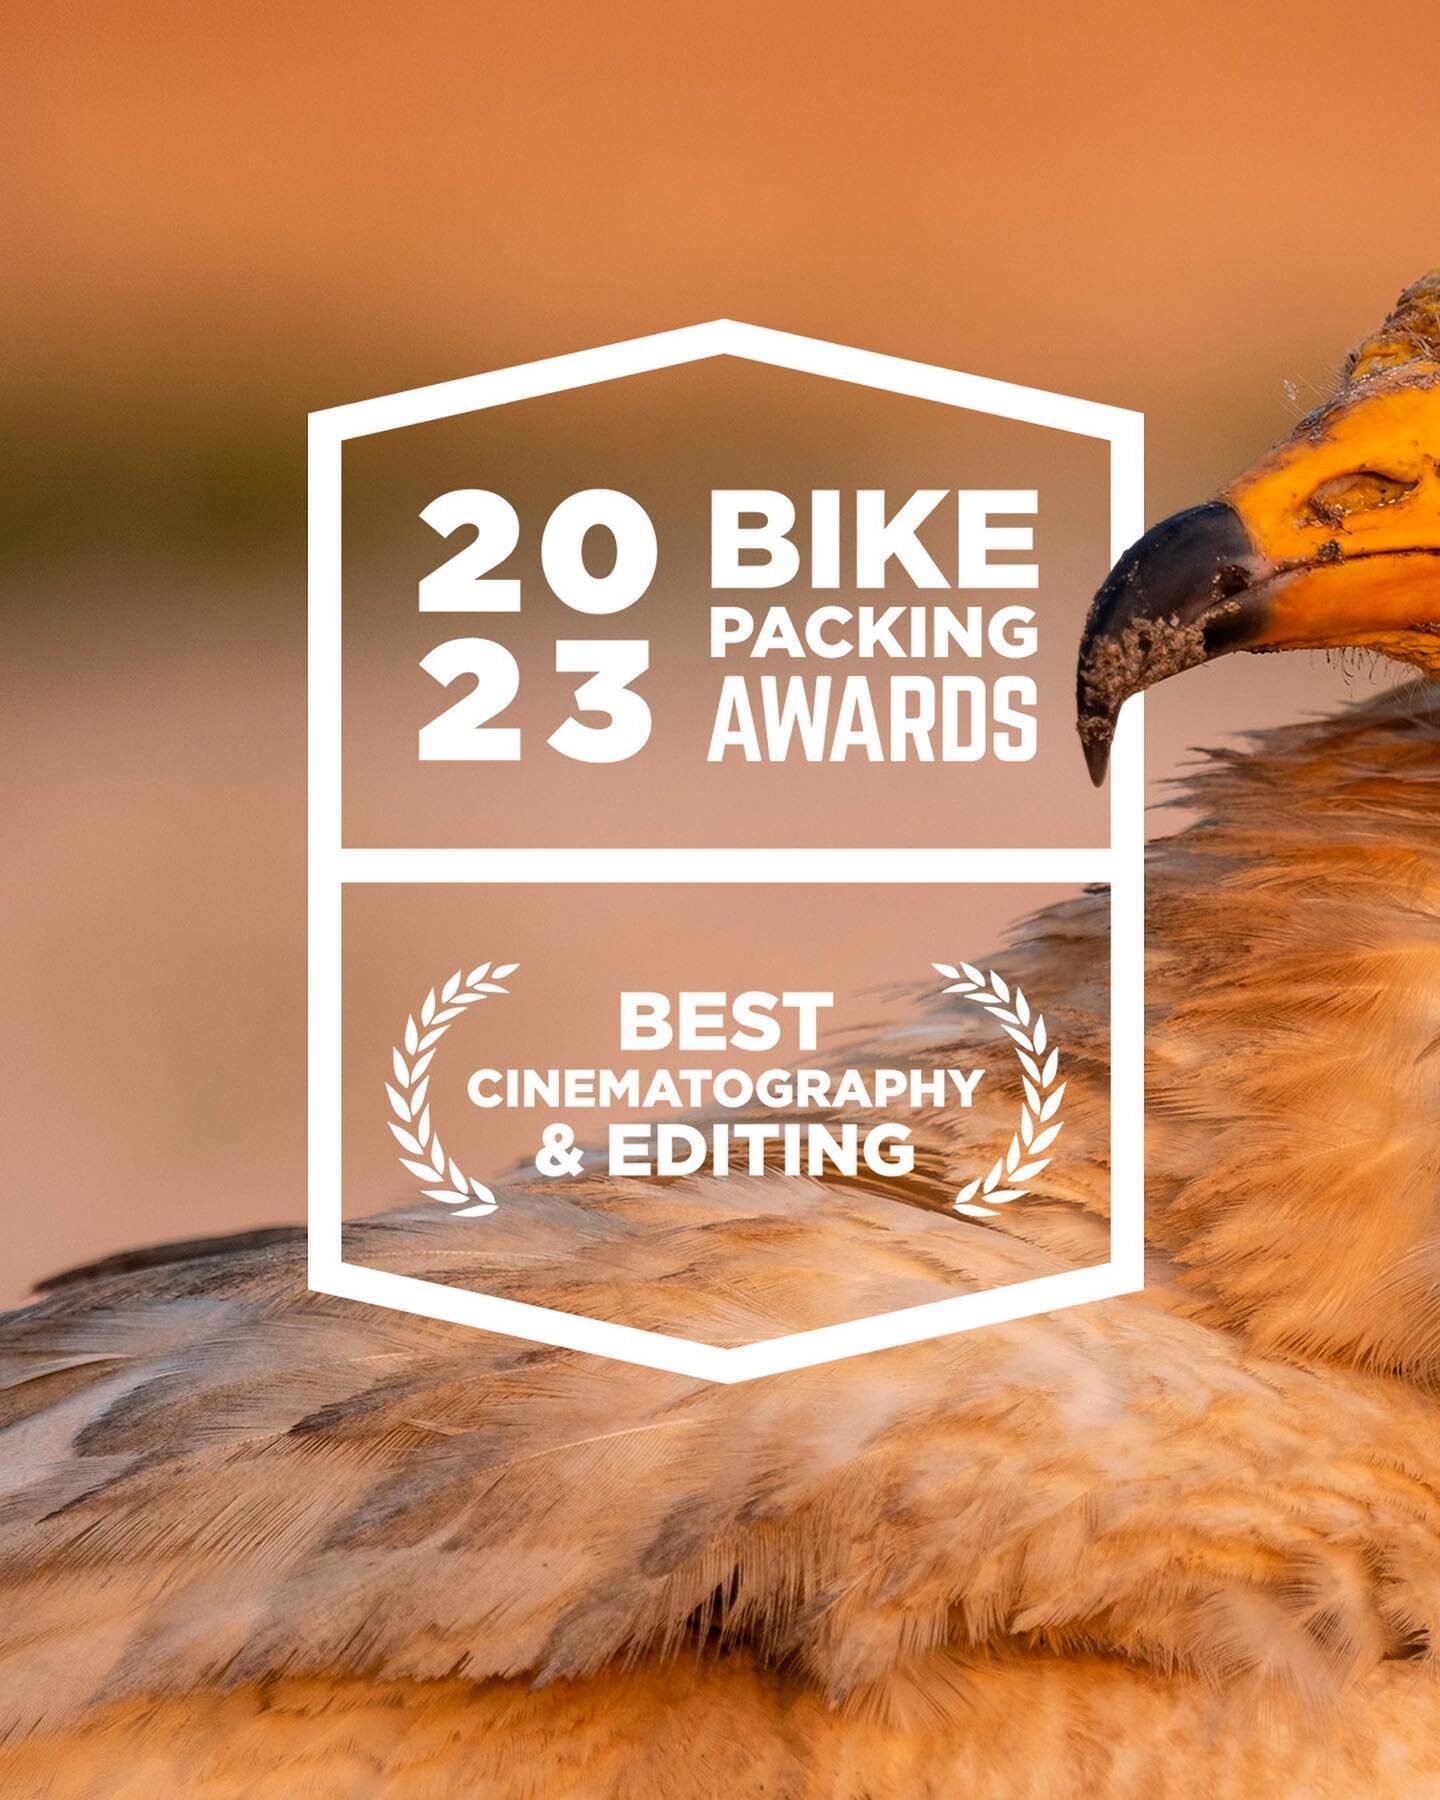 &lsquo;Socotra&rsquo; is our seventh film to be awarded in the Bikepacking Awards from the first edition in 2015. We&rsquo;re so proud of the hard work we made out there, even in extreme conditions and without the help of a filming crew. We&rsquo;re 